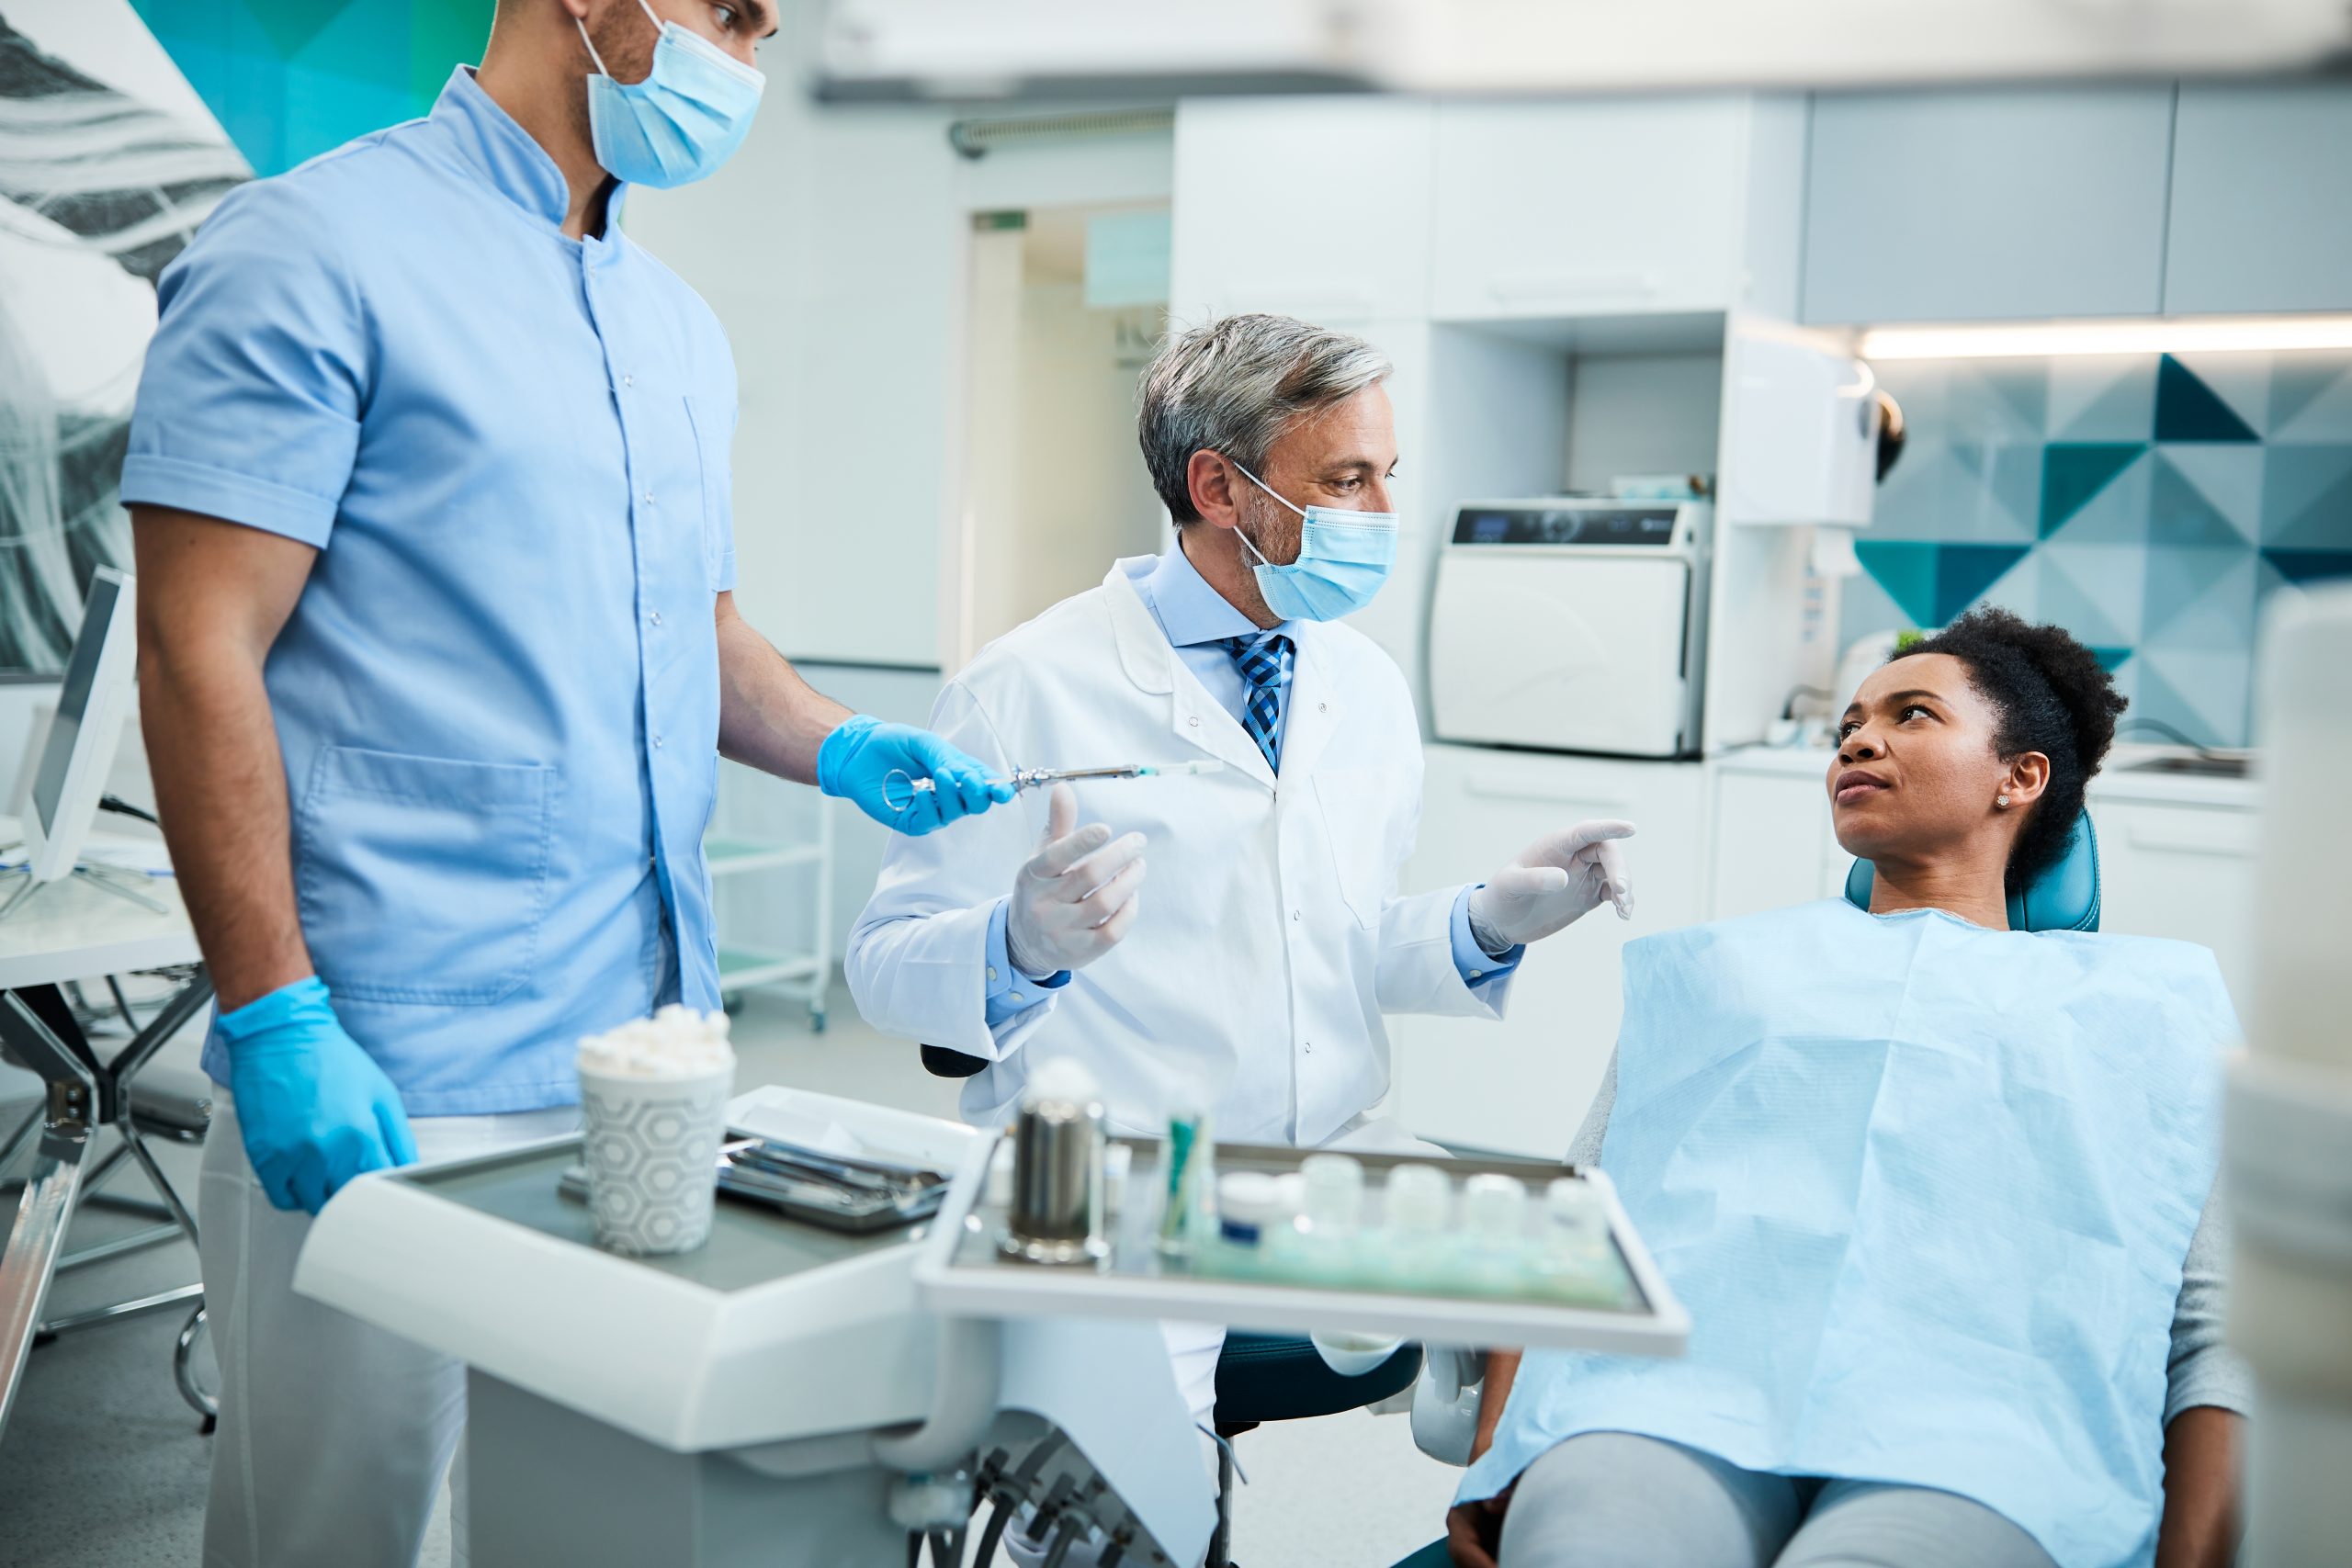 A Philadelphia oral medicine specialist talks with a medically complex patient in a dental chair, as a dental assistant stands near.